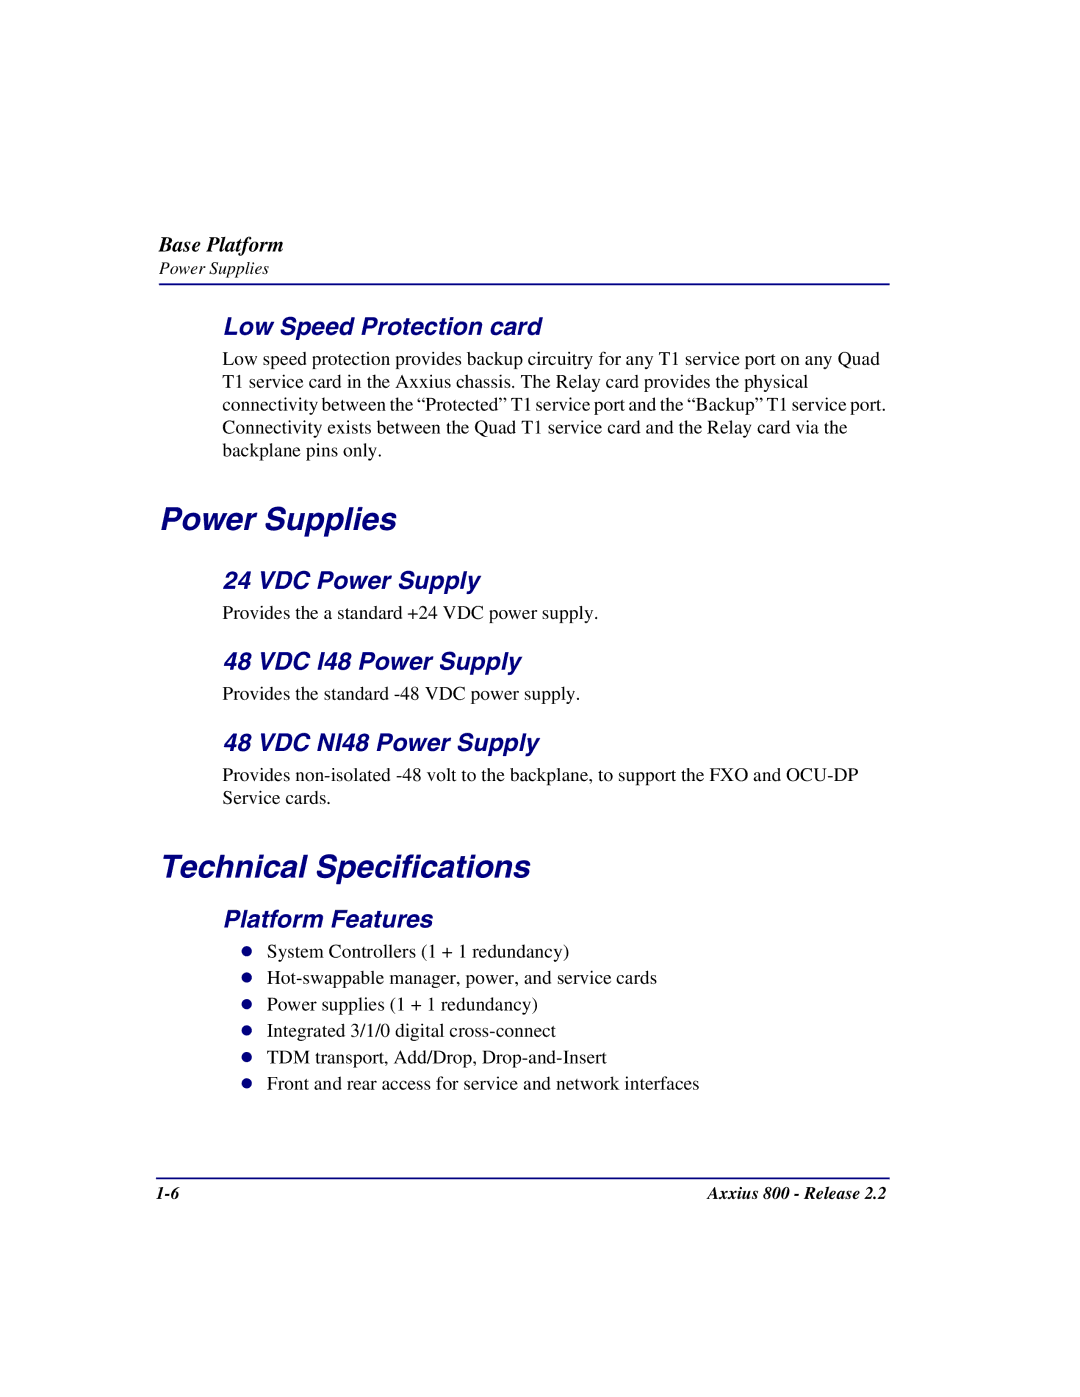 Carrier Access Axxius 800 user manual Power Supplies, Technical Specifications 